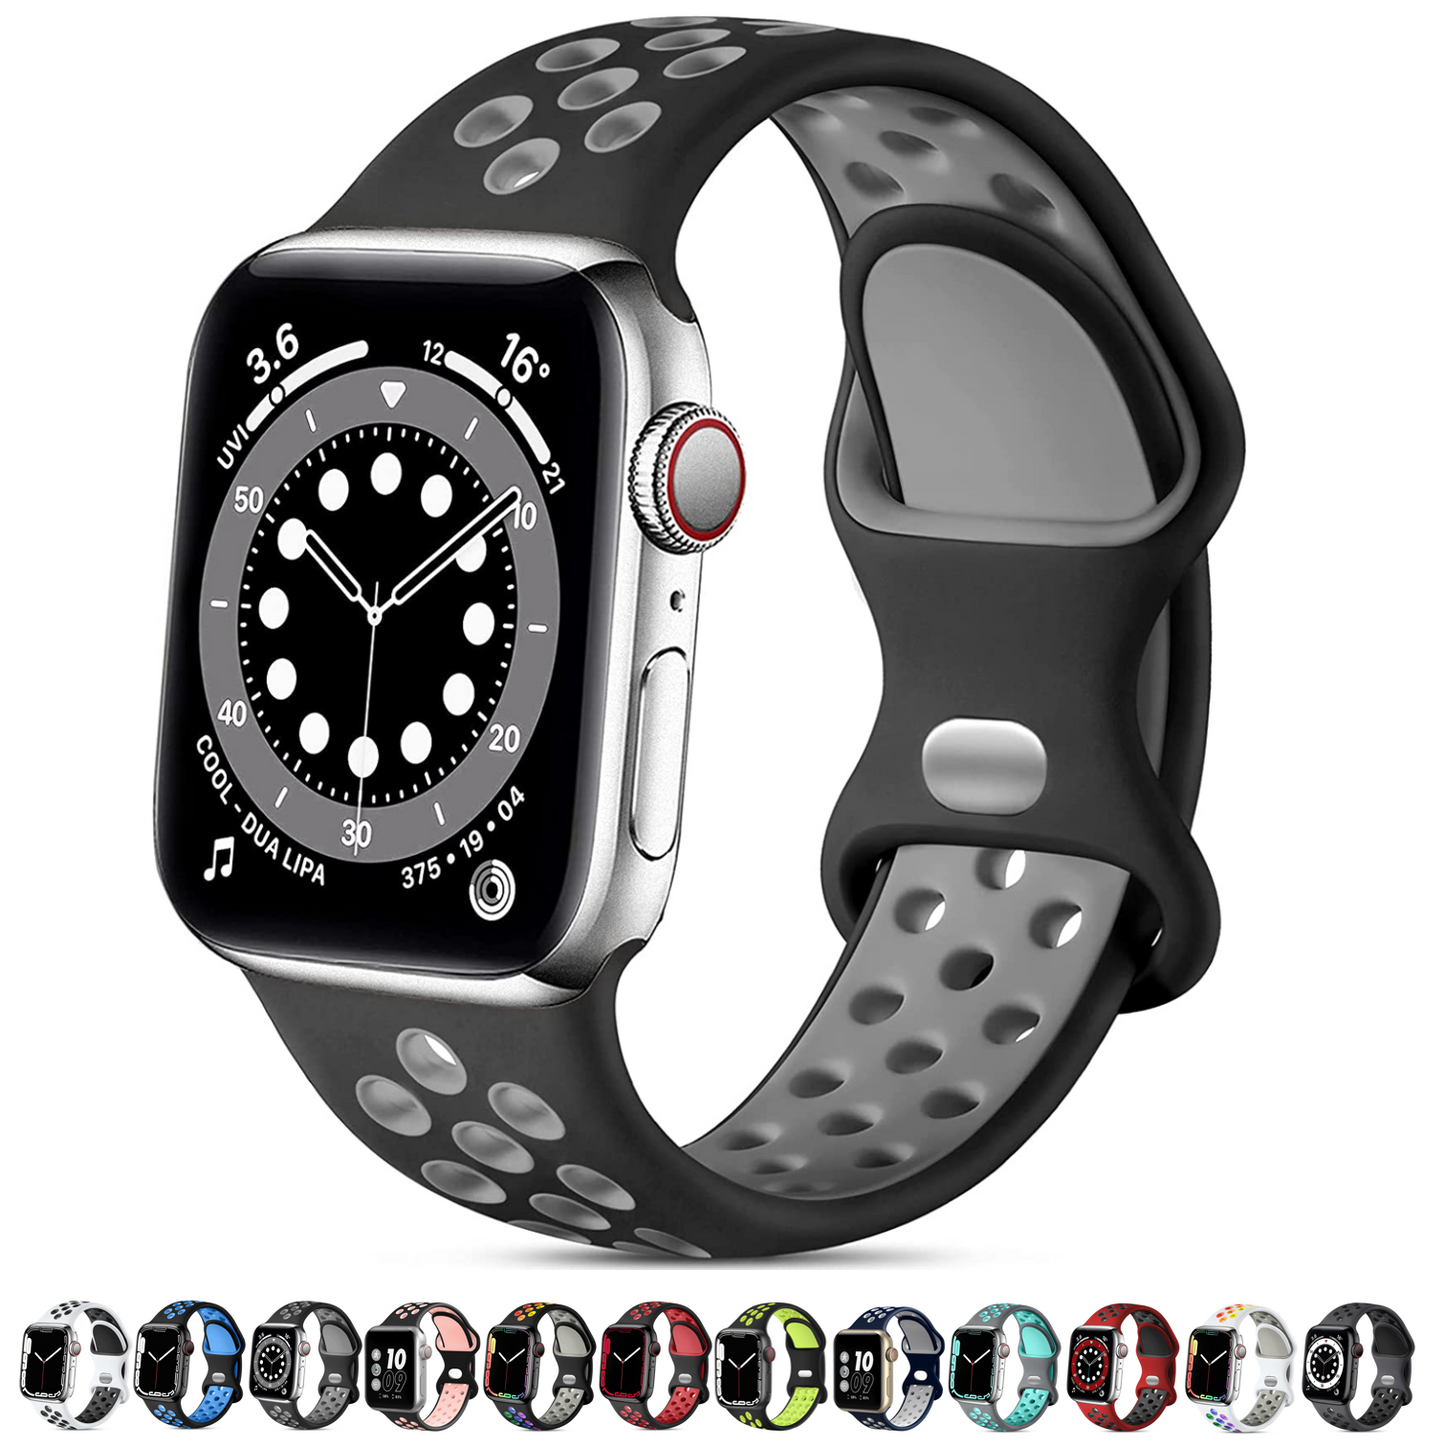 Silicone Apple Watch Band With Air Holes, 1 Pack